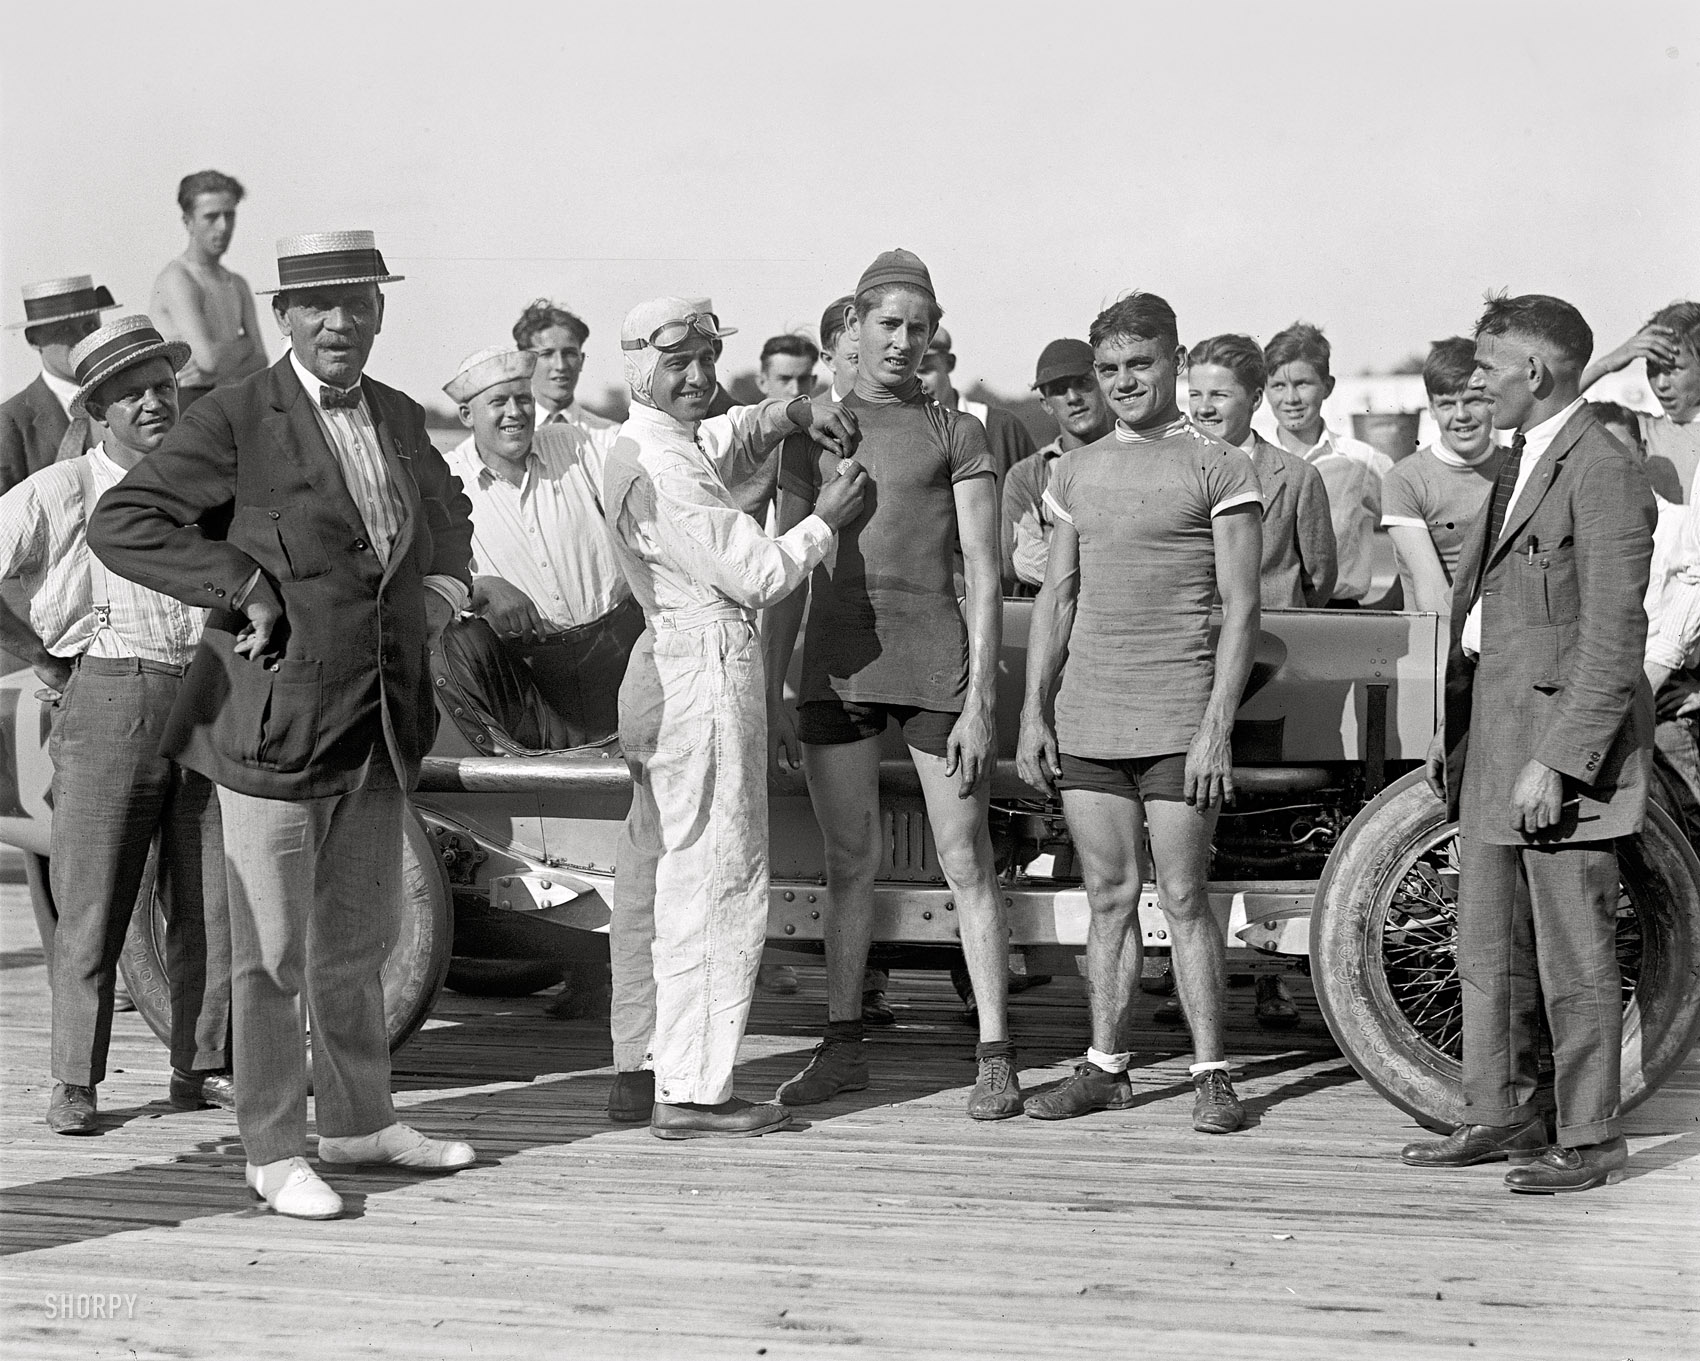 July 18, 1925. Laurel, Maryland. "Race car driver Peter De Paolo and Chas. Allen, Laurel bicycle races." National Photo Company glass negative. View full size.